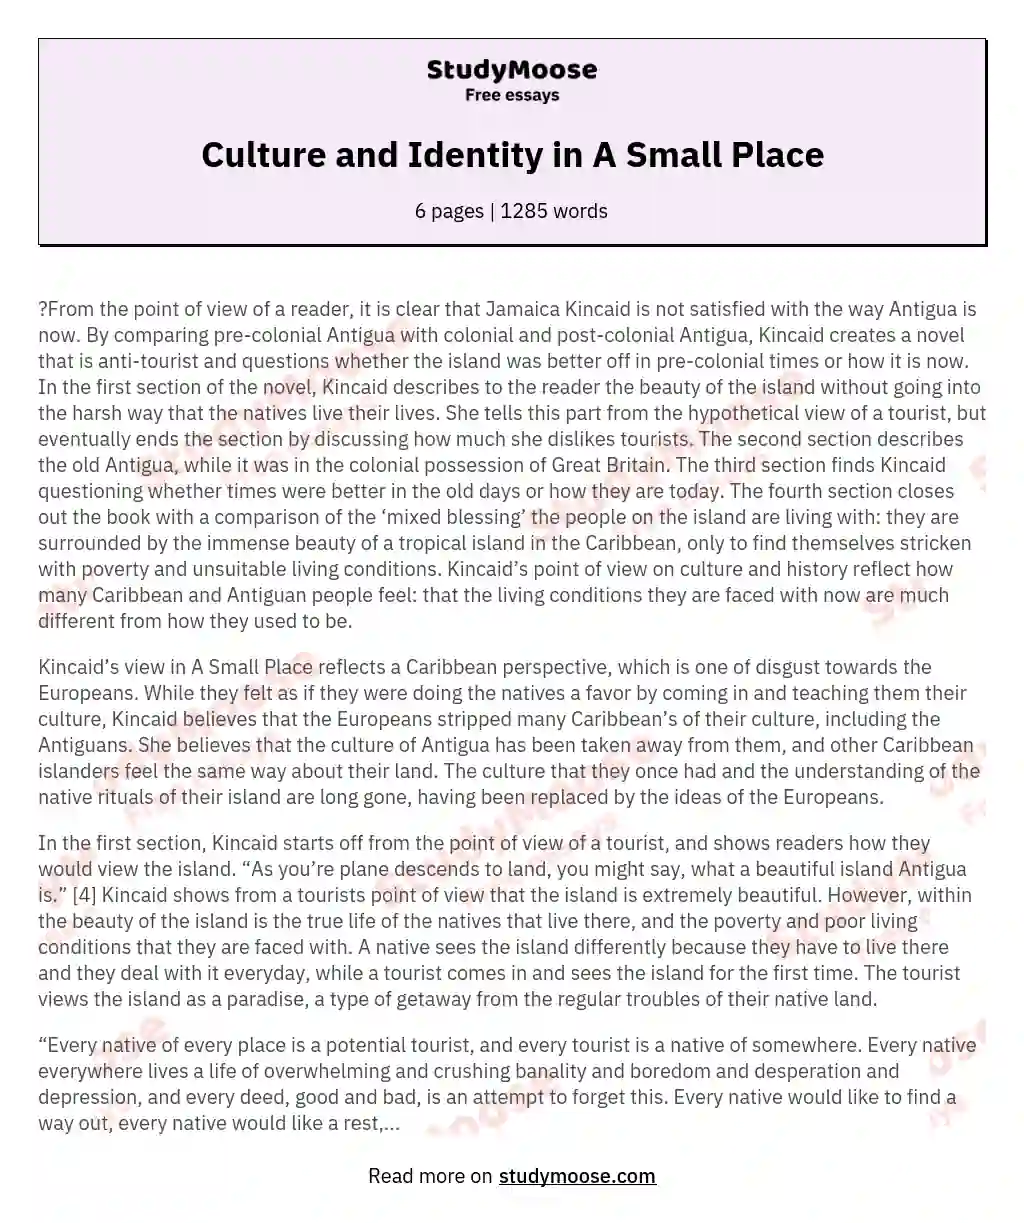 Culture and Identity in A Small Place essay